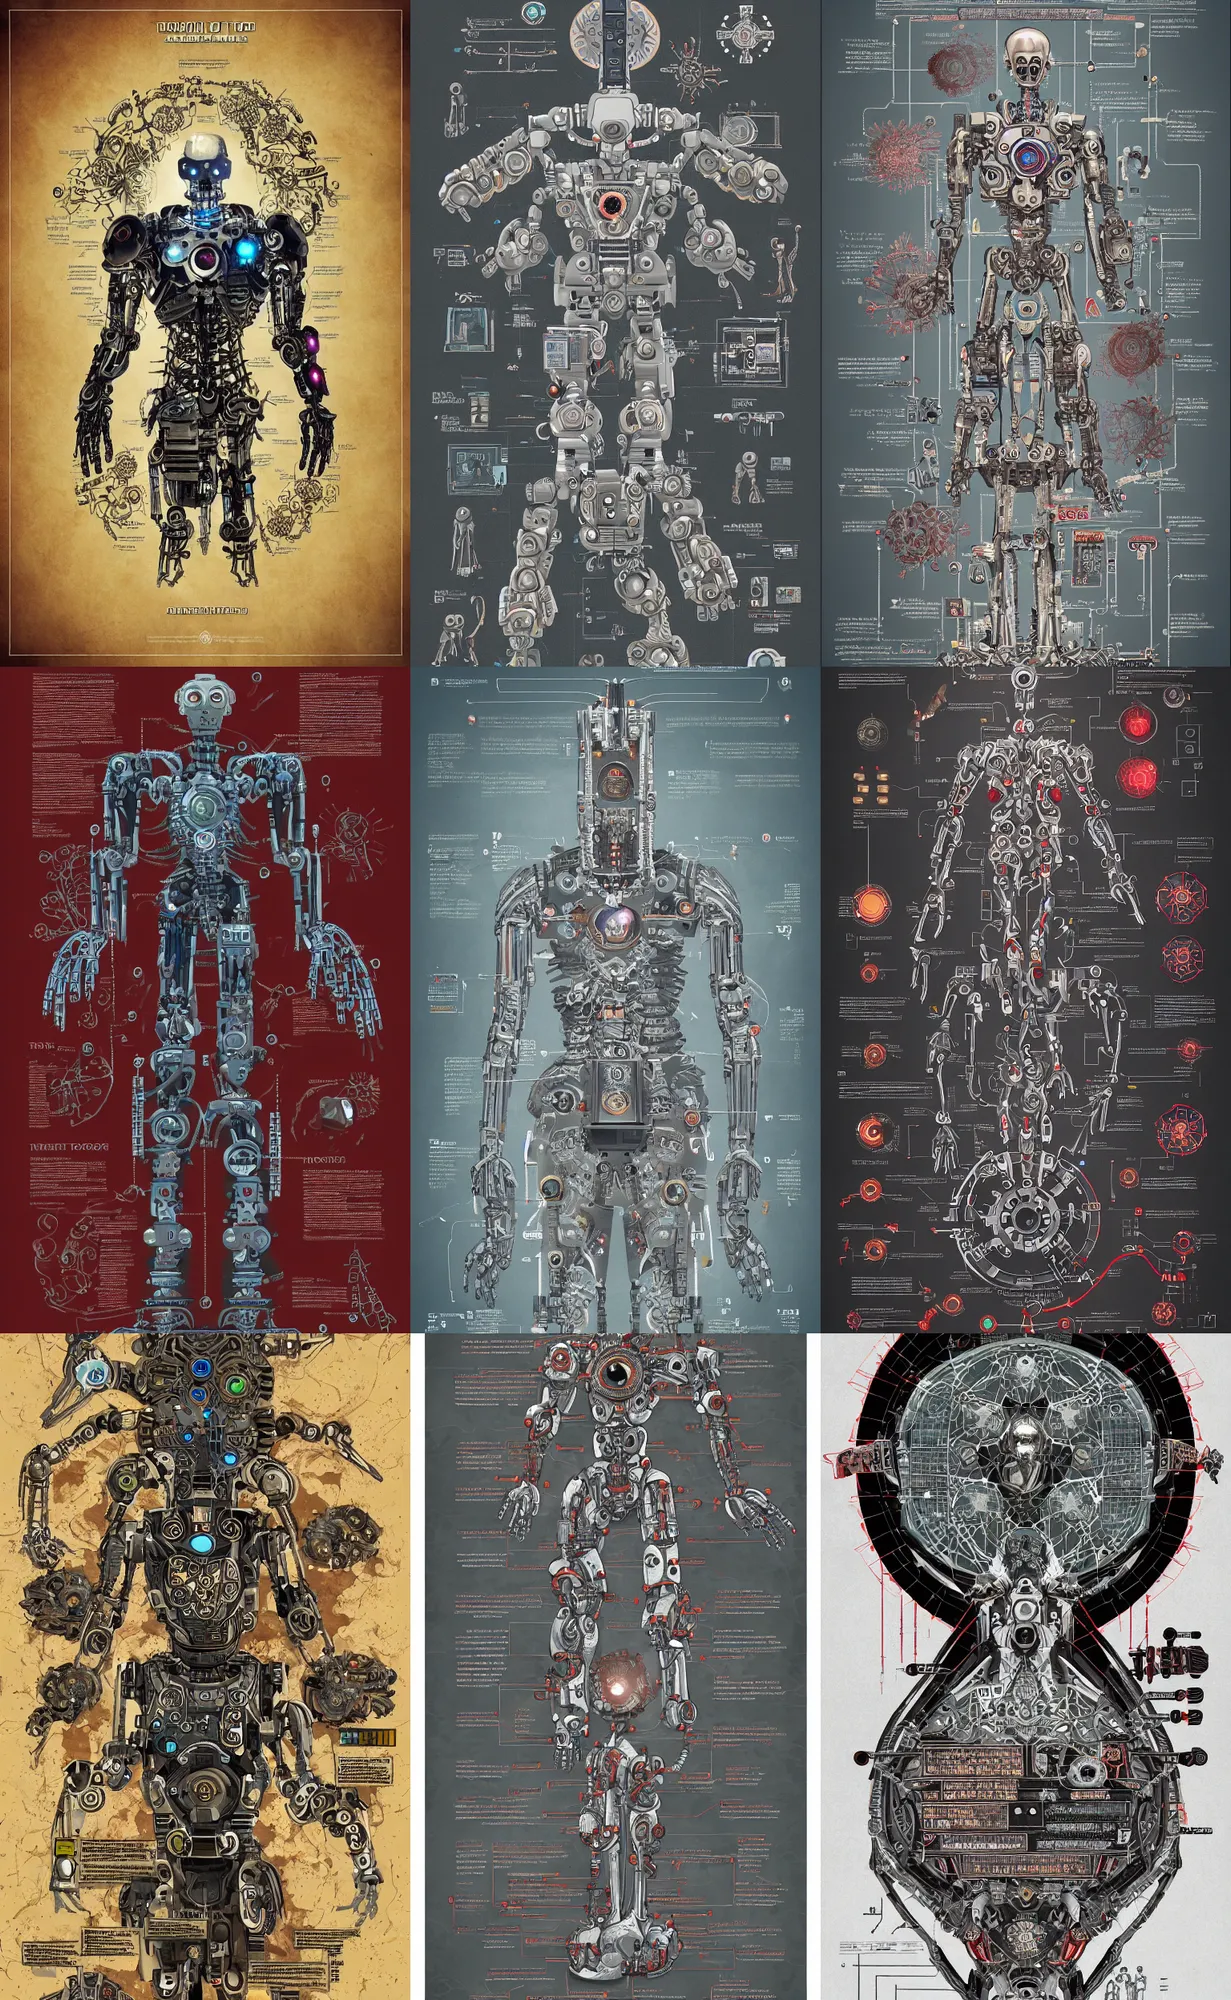 Prompt: anatomy of the terminator, robot, cyborg, t 1 0 0, arc reactor, bloodborne diagrams, mystical, intricate ornamental tower floral flourishes, rule of thirds, technology meets fantasy, map, infographic, concept art, art station, style of wes anderson